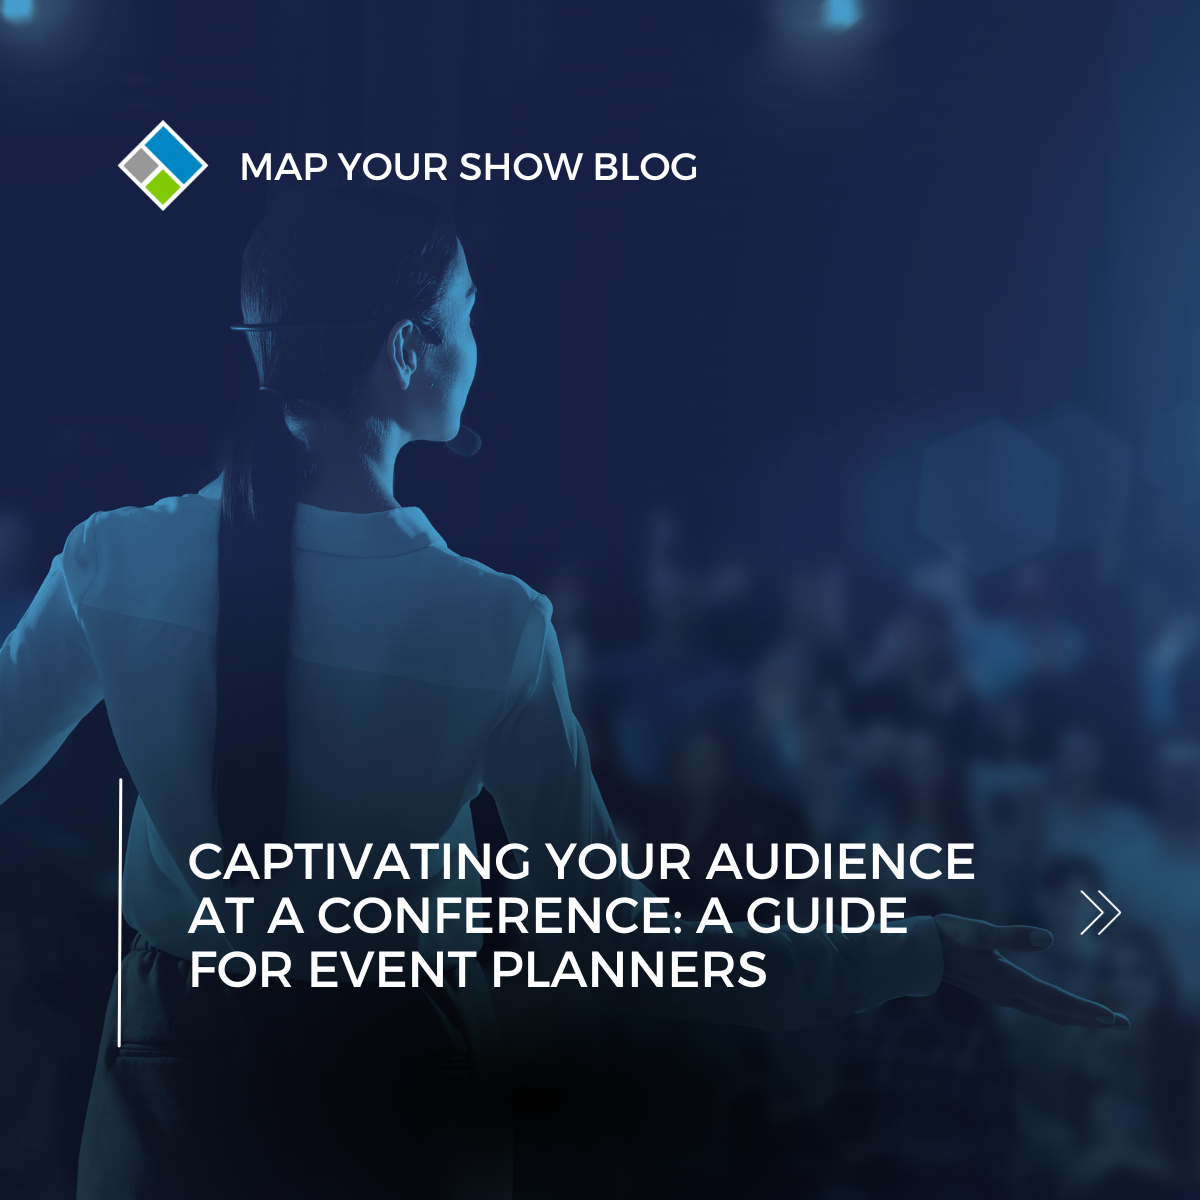 Captivating Your Audience at a Conference: A Guide for Event Planners